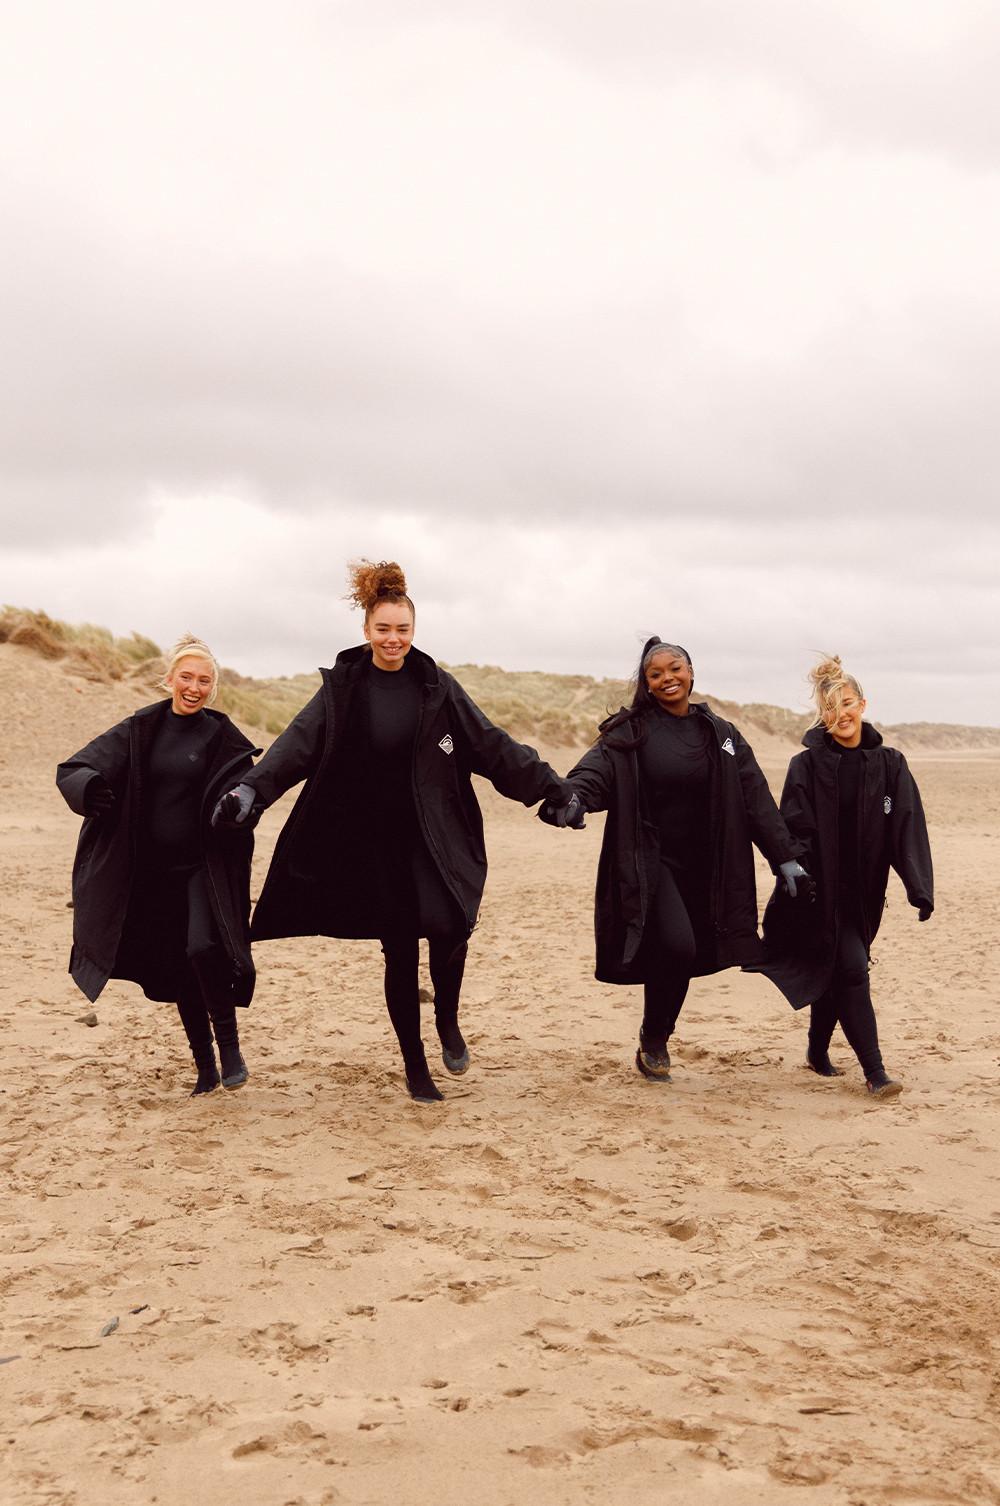 Influencers wear black dry robes on the beach